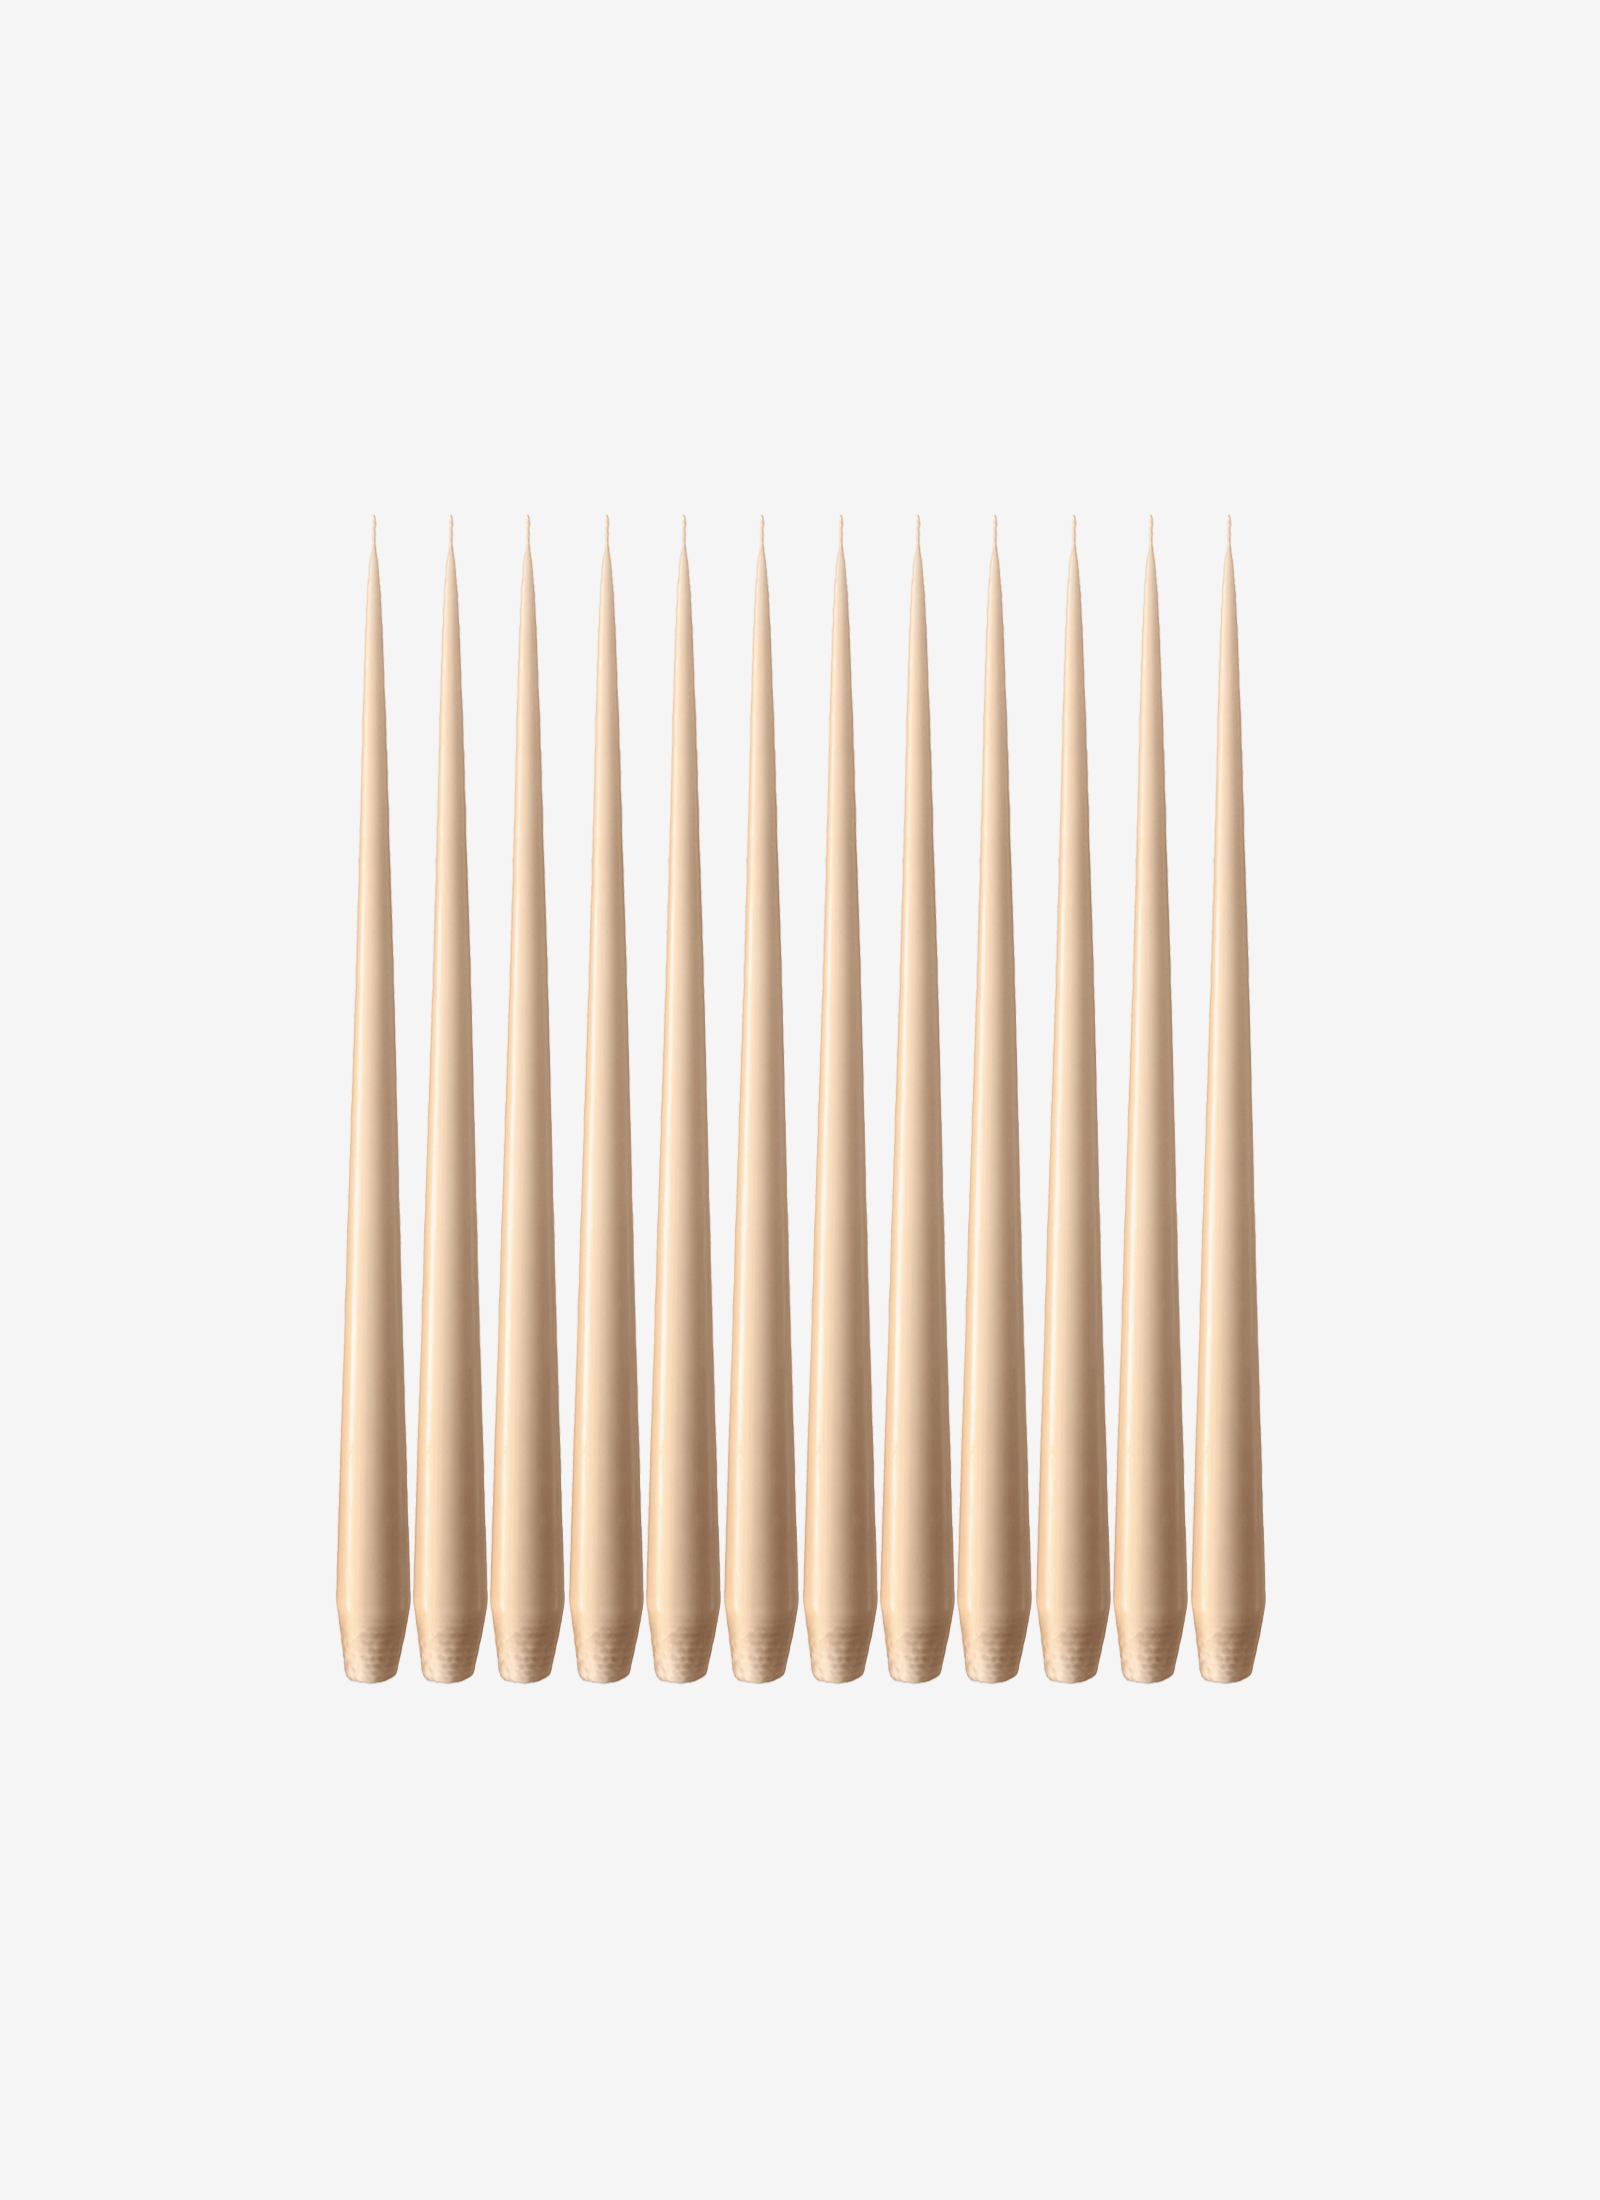 Case of 12 Tapered Candles in Nude #11 - 42cm